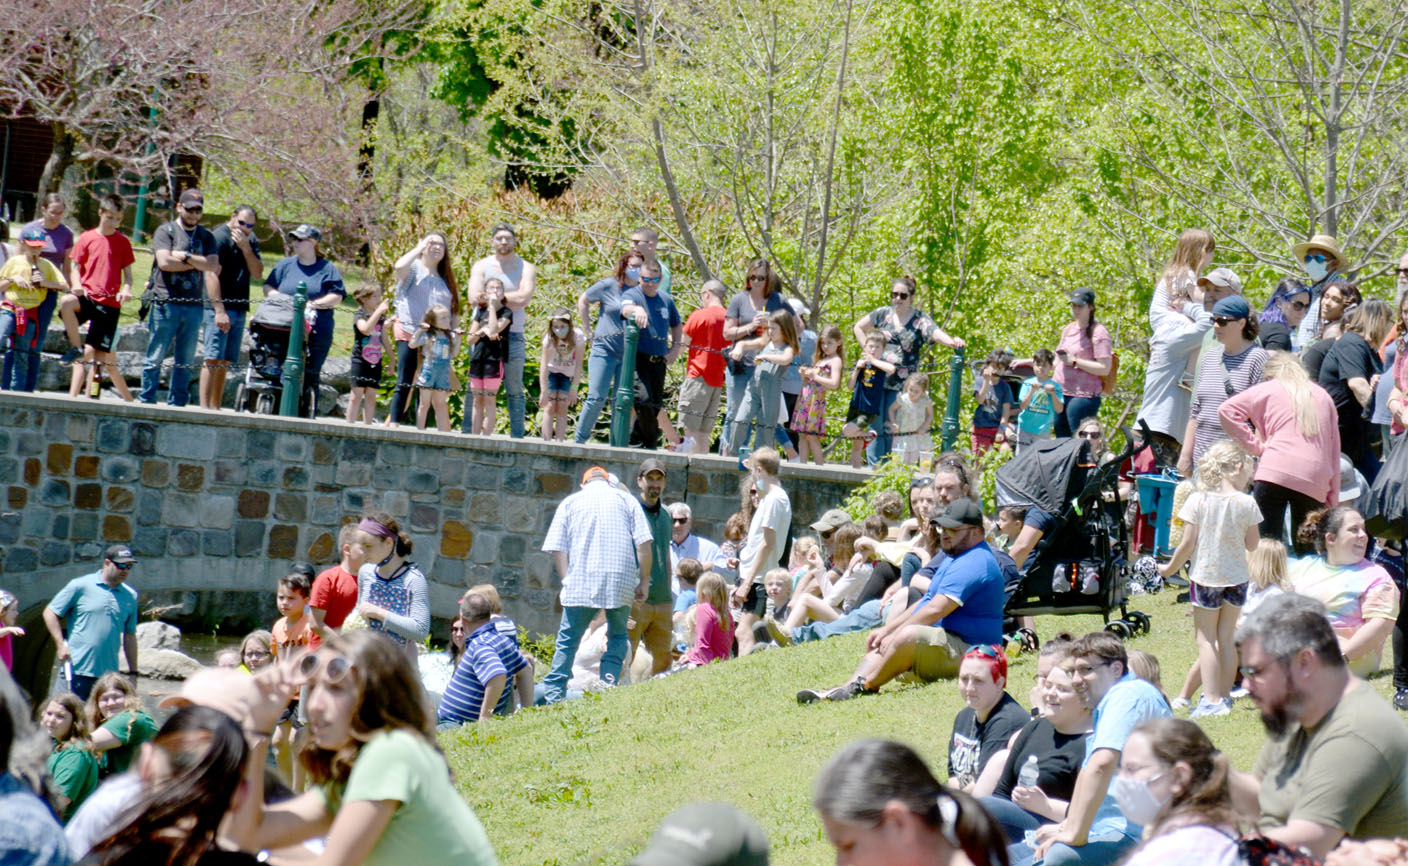 Dogwood Festival returns this weekend in Siloam Springs Northwest